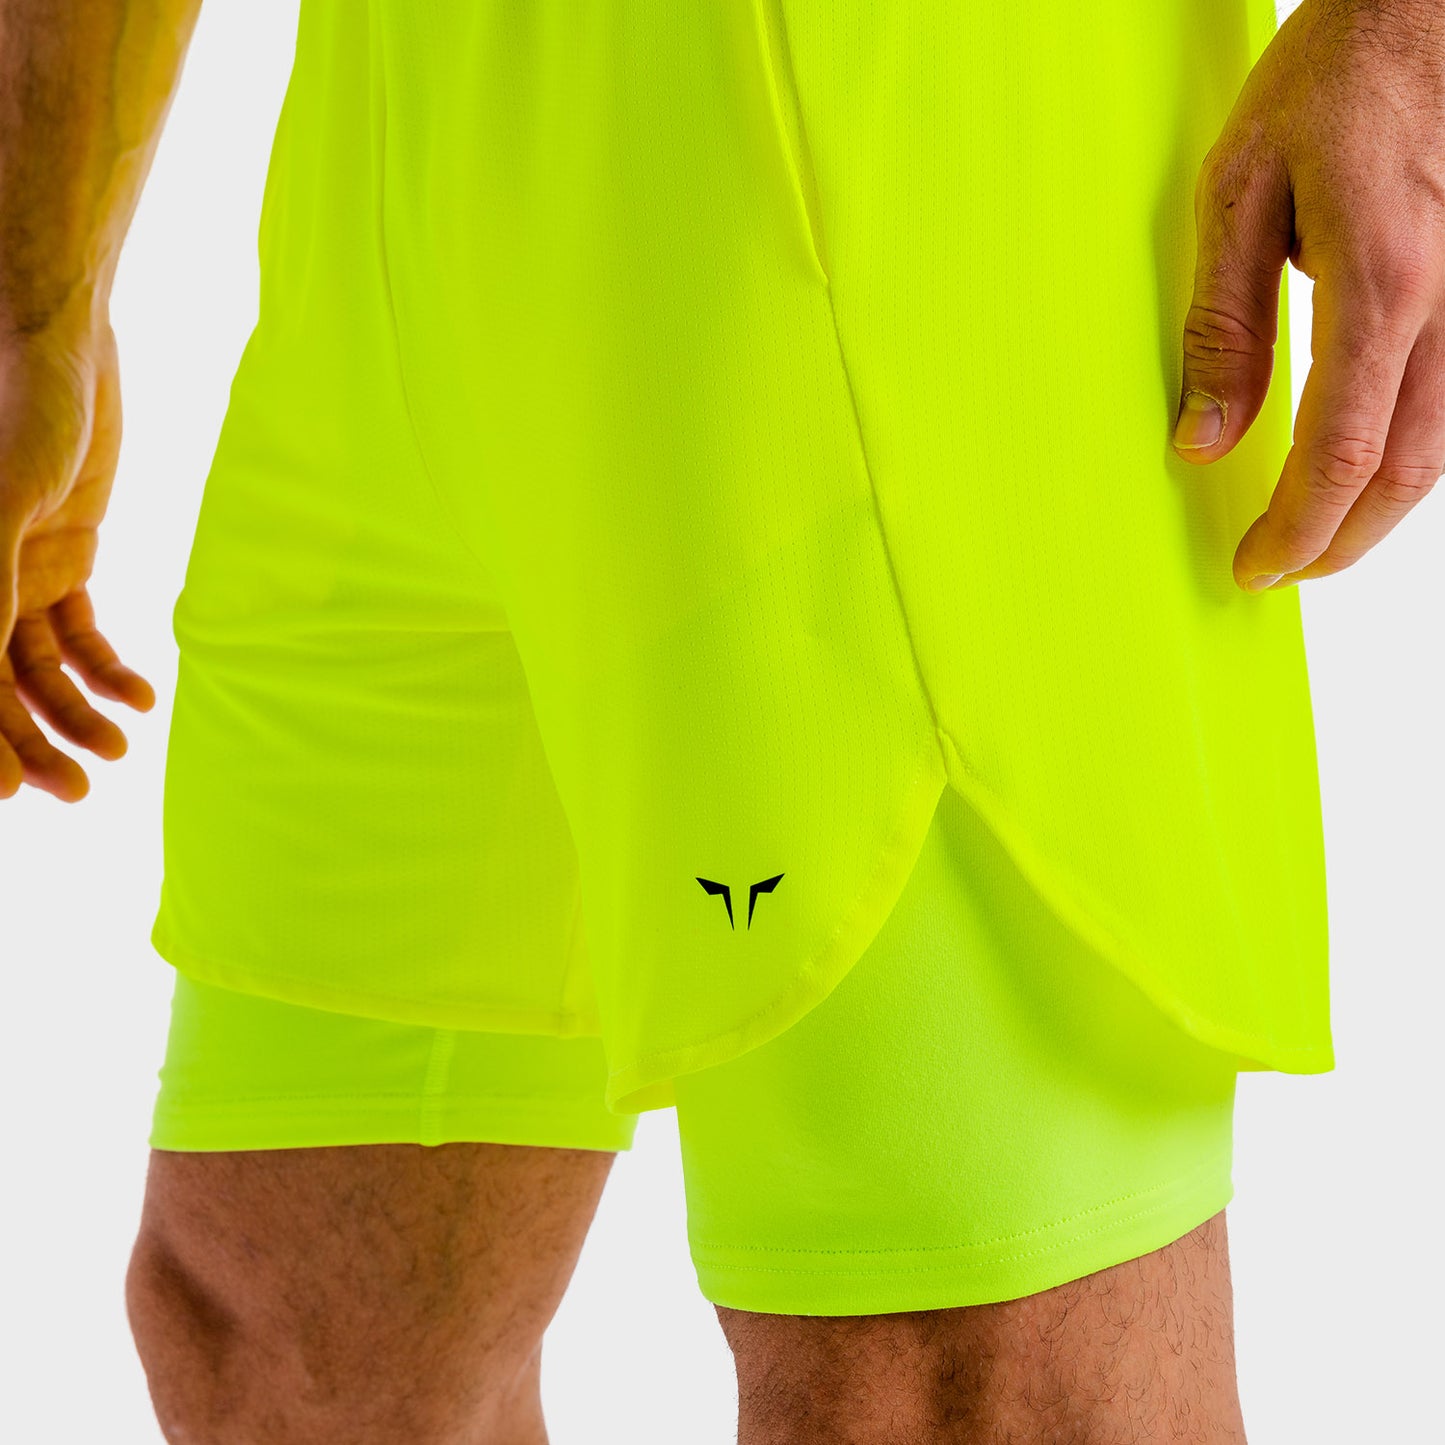 squatwolf-workout-short-for-men-core-mesh-2-in-1-shorts-neon-gym-wear